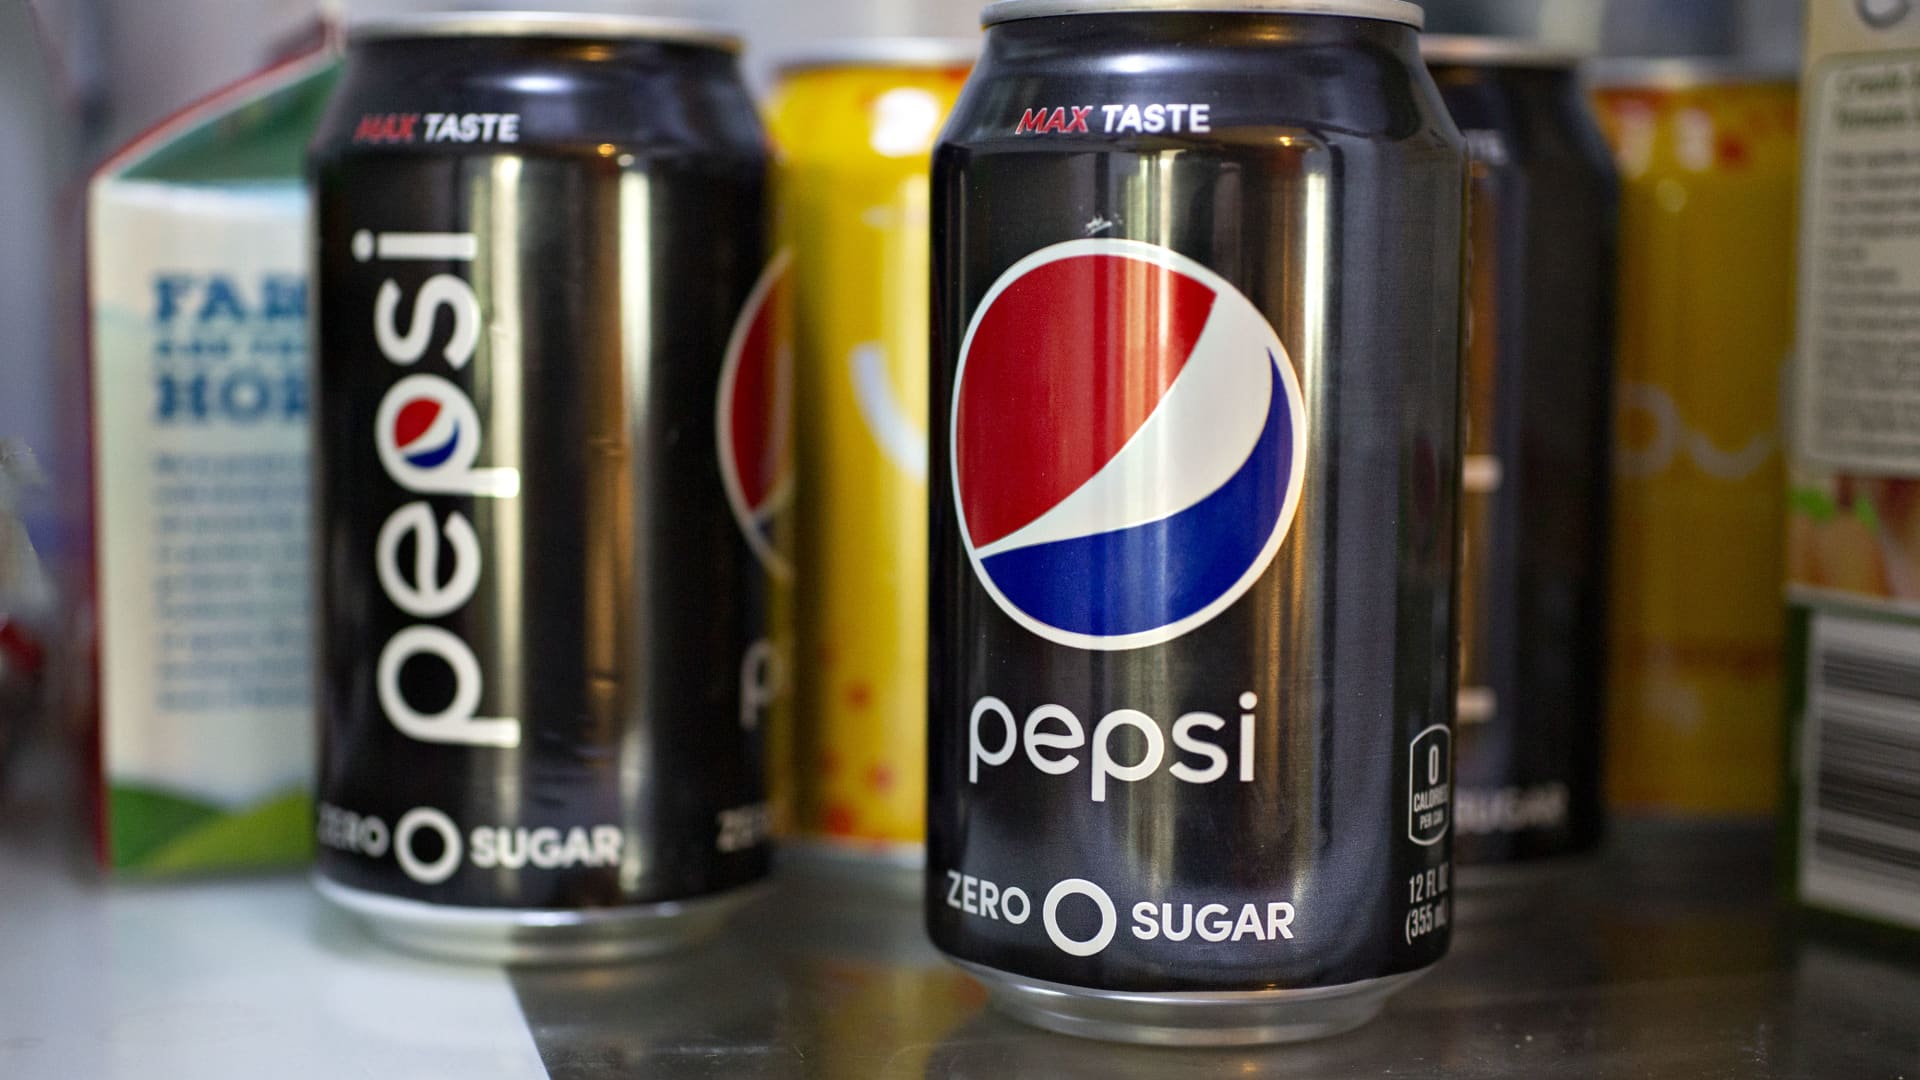 FDA says soda sweetener aspartame is safe, disagreeing with WHO finding on possible cancer link